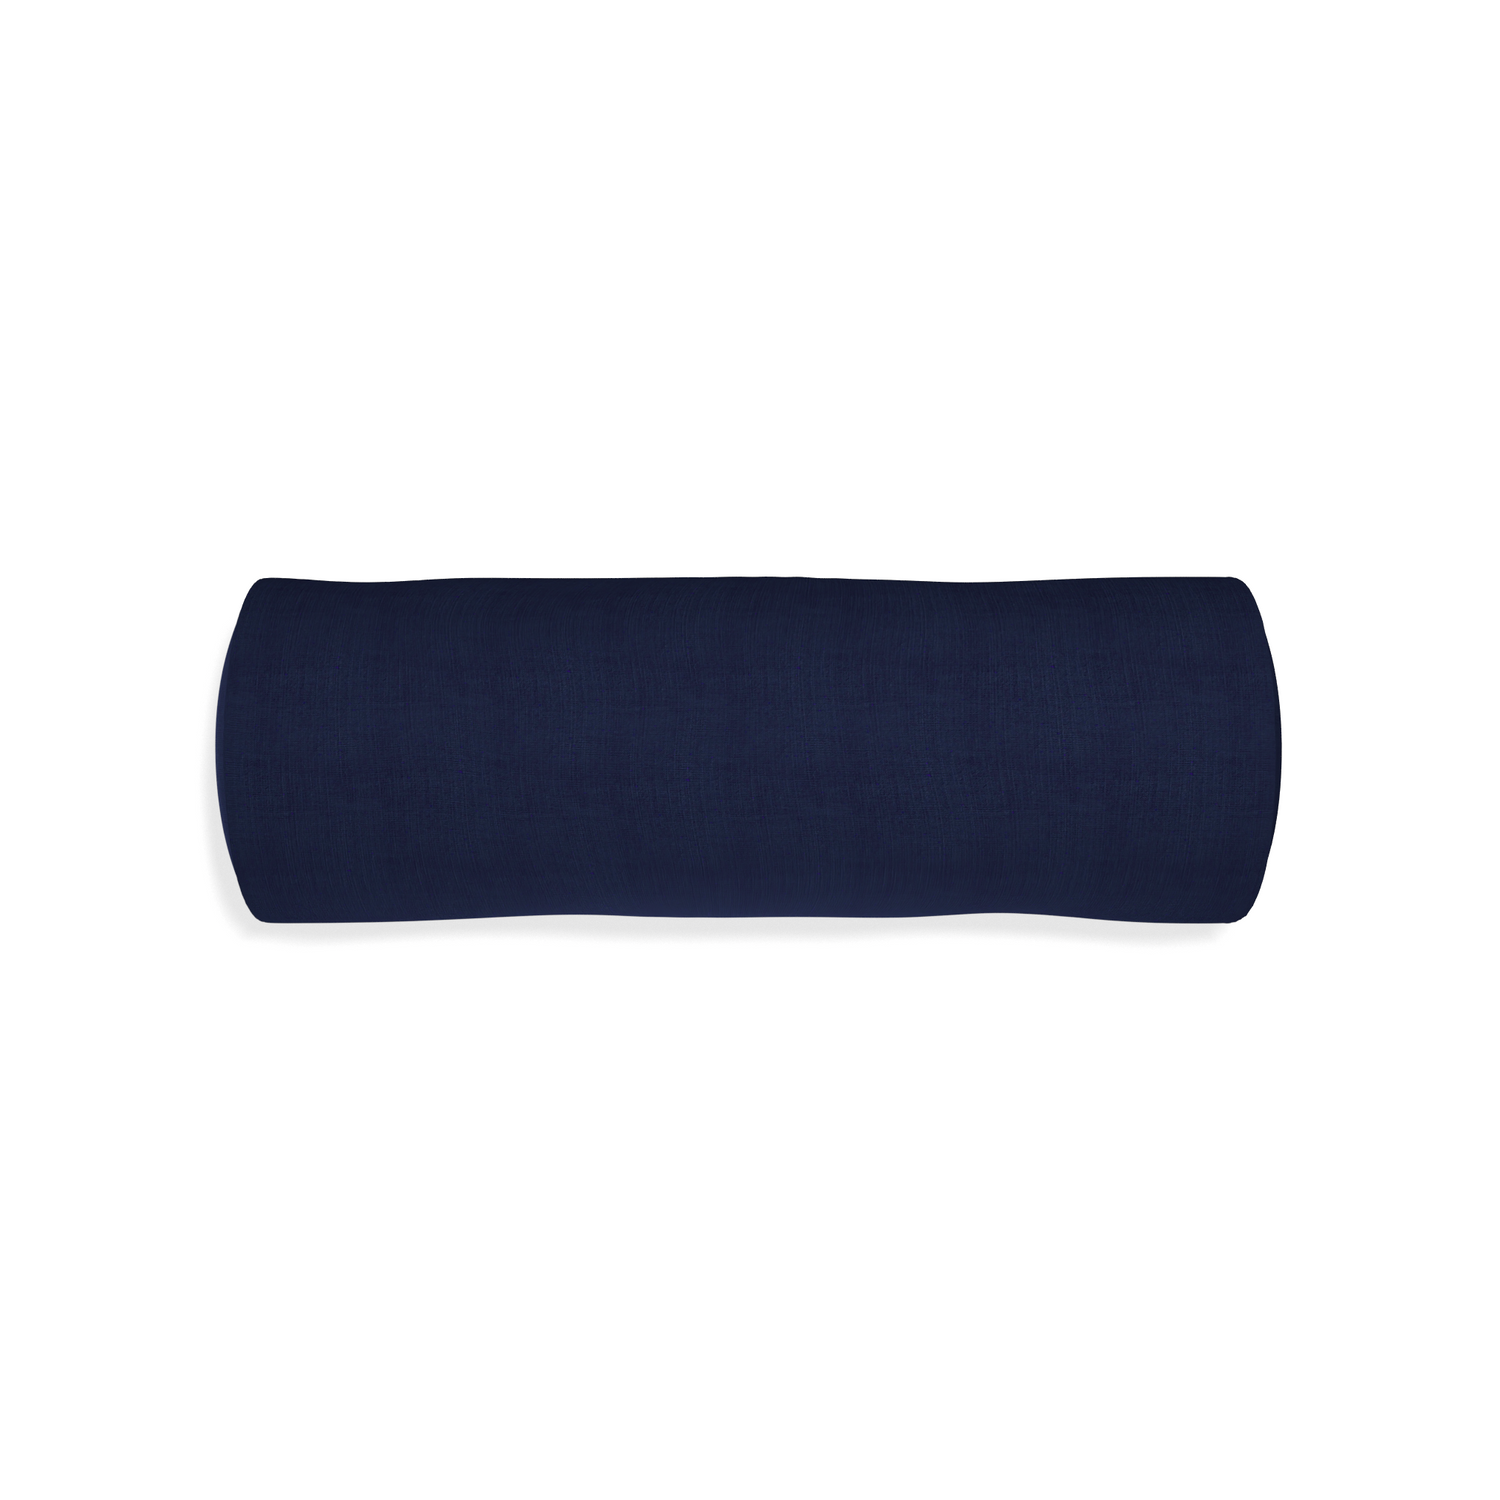 Bolster midnight custom navy bluepillow with none on white background